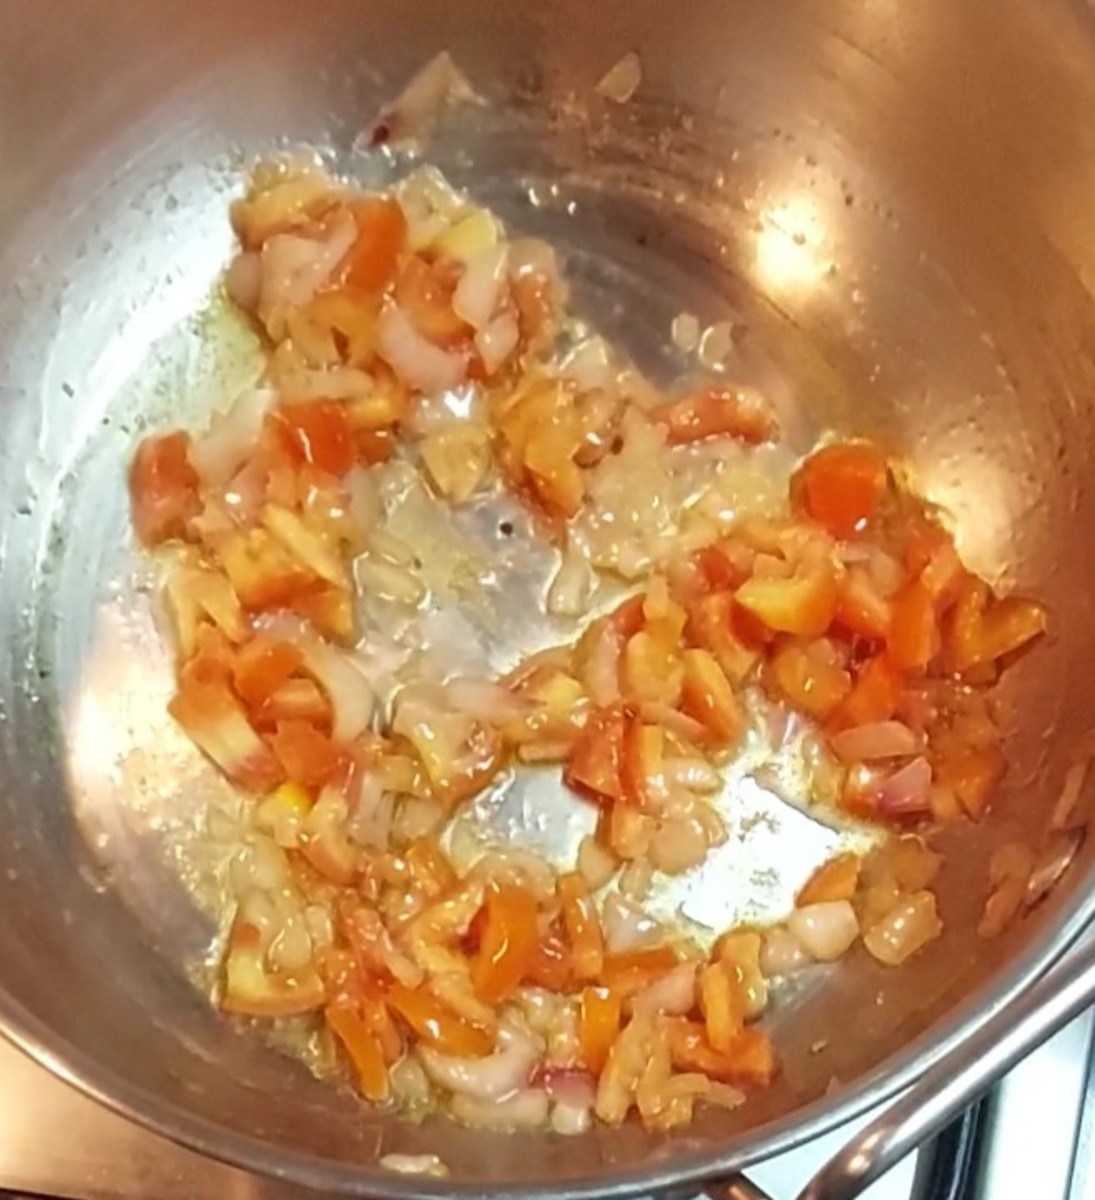 Add 1/2 cup tomato and fry till it shrinks. No need to cook till soft and mushy.